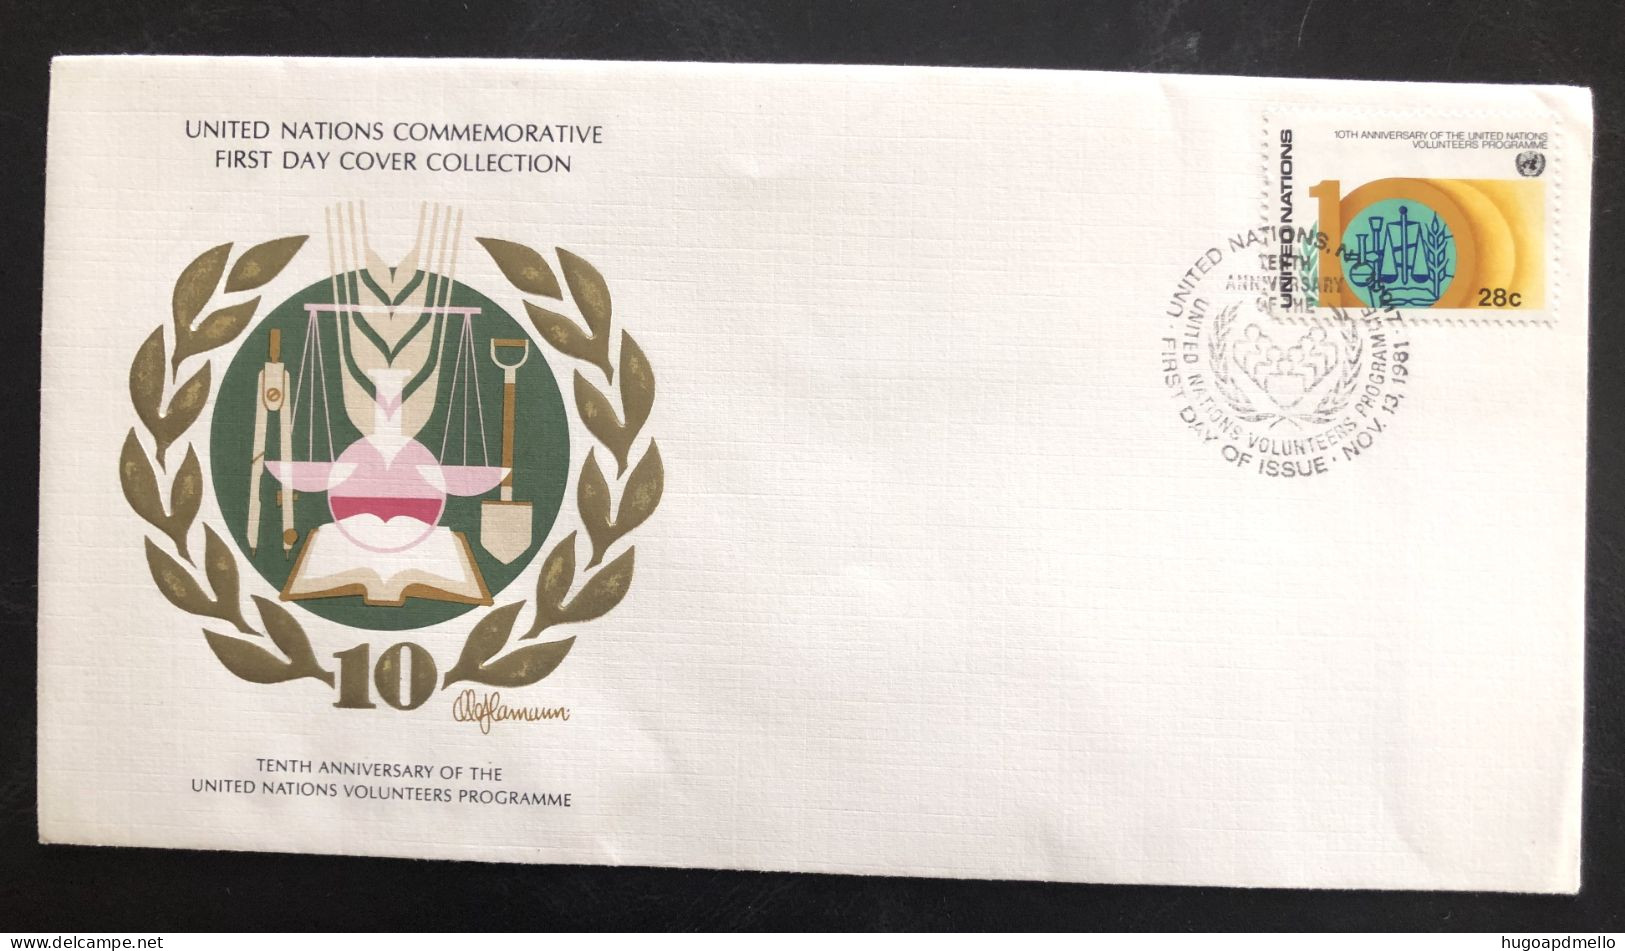 UNITED NATIONS, Uncirculated FDC « TENTH ANNIVERSARY OF THE UNITED NATIONS VOLUNTEERS PROGRAMME », 1981 - ONU